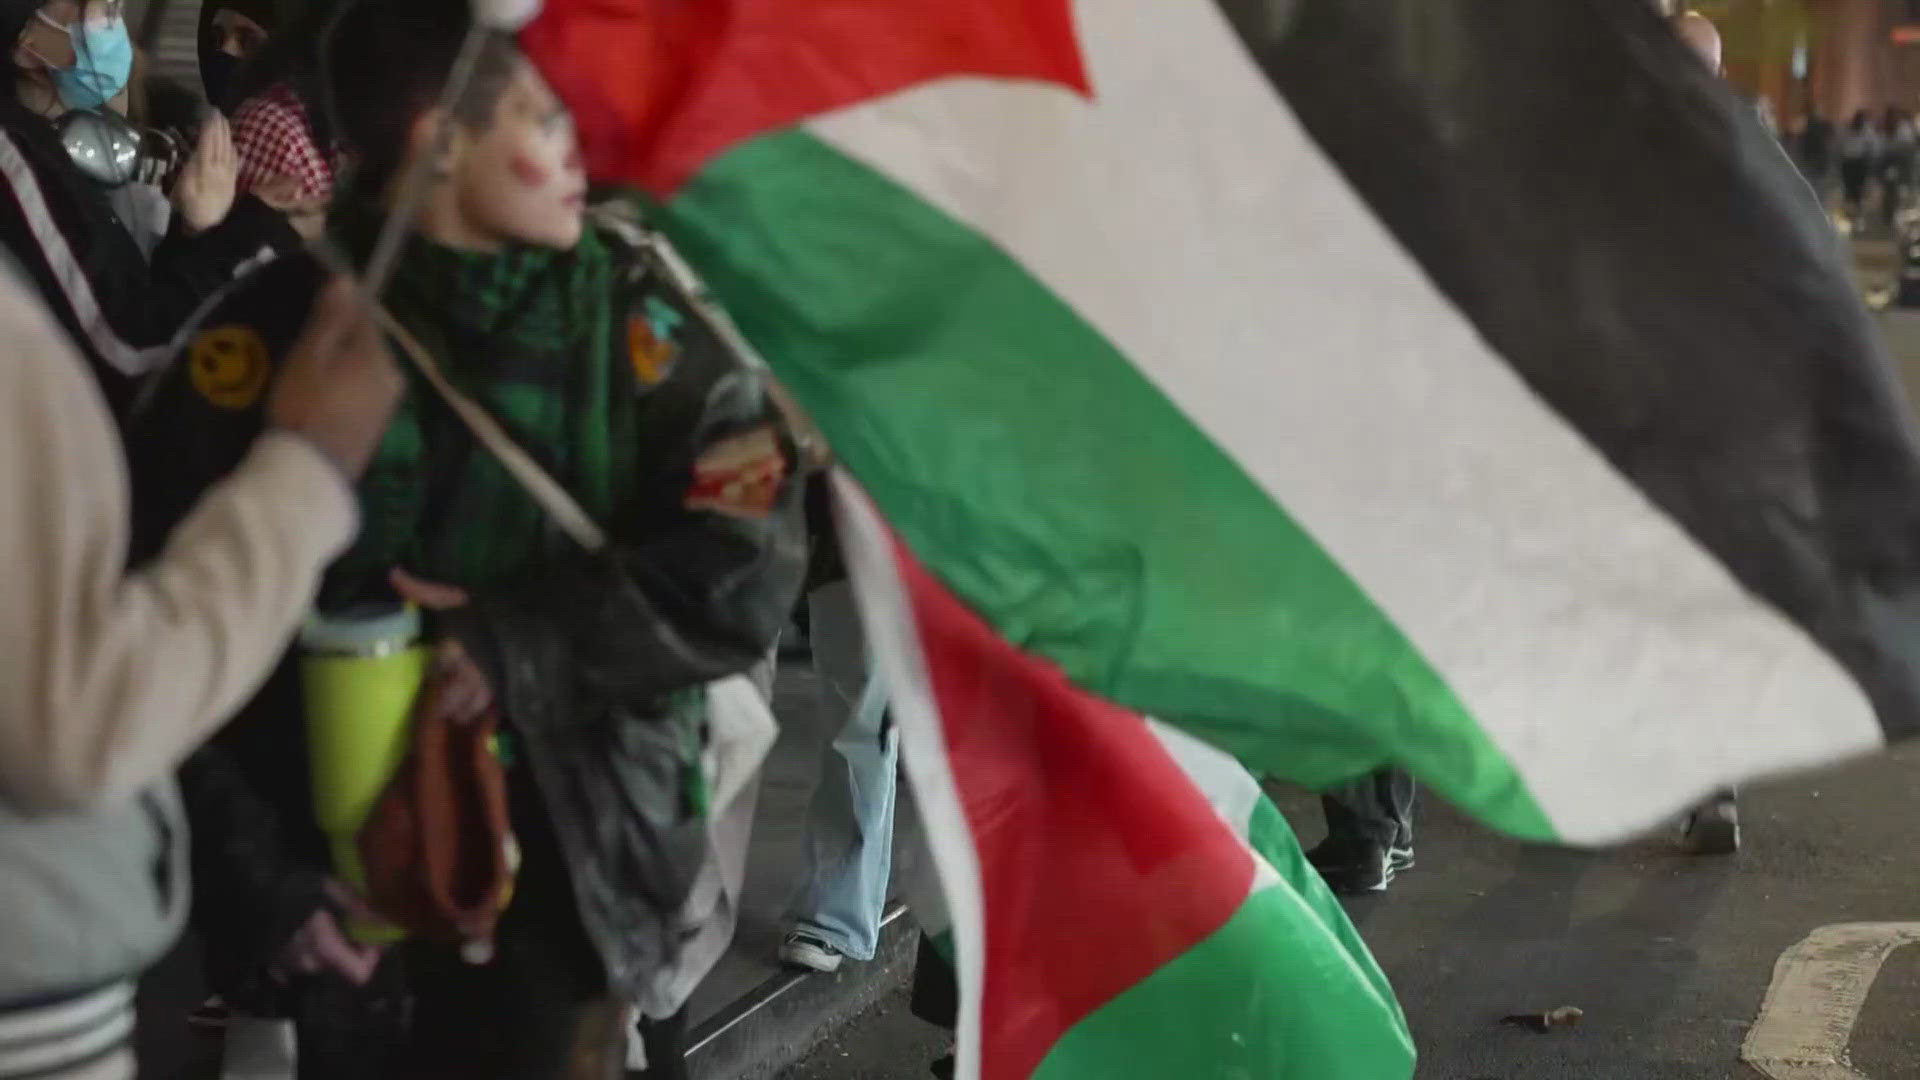 Pro-Palestinian demonstrations broke out on more campuses on Tuesday.